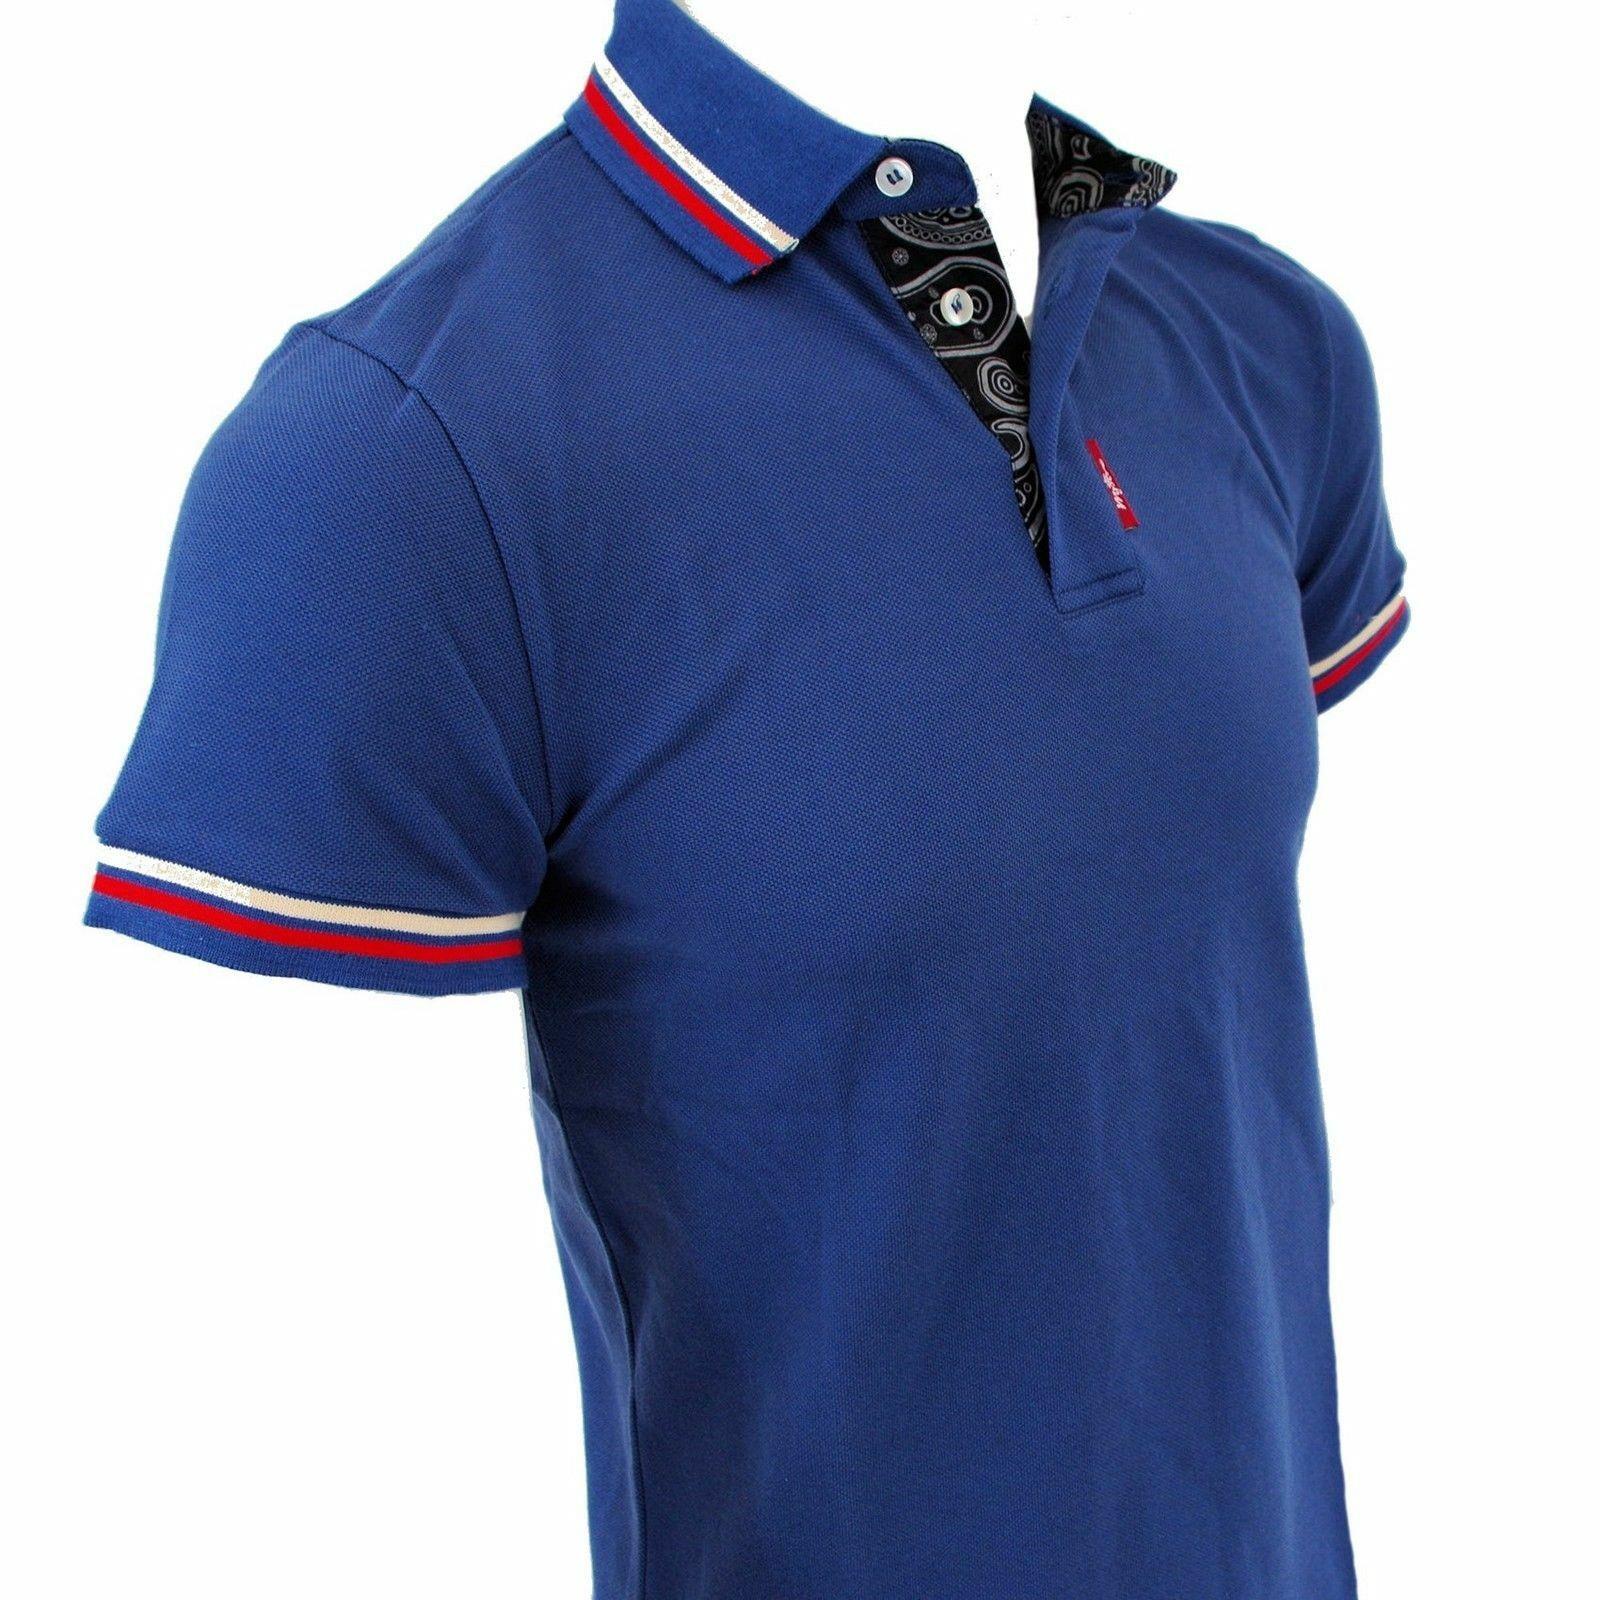 Warrior blue poly-cotton heavy-weight polycotton classic polo-shirt size small